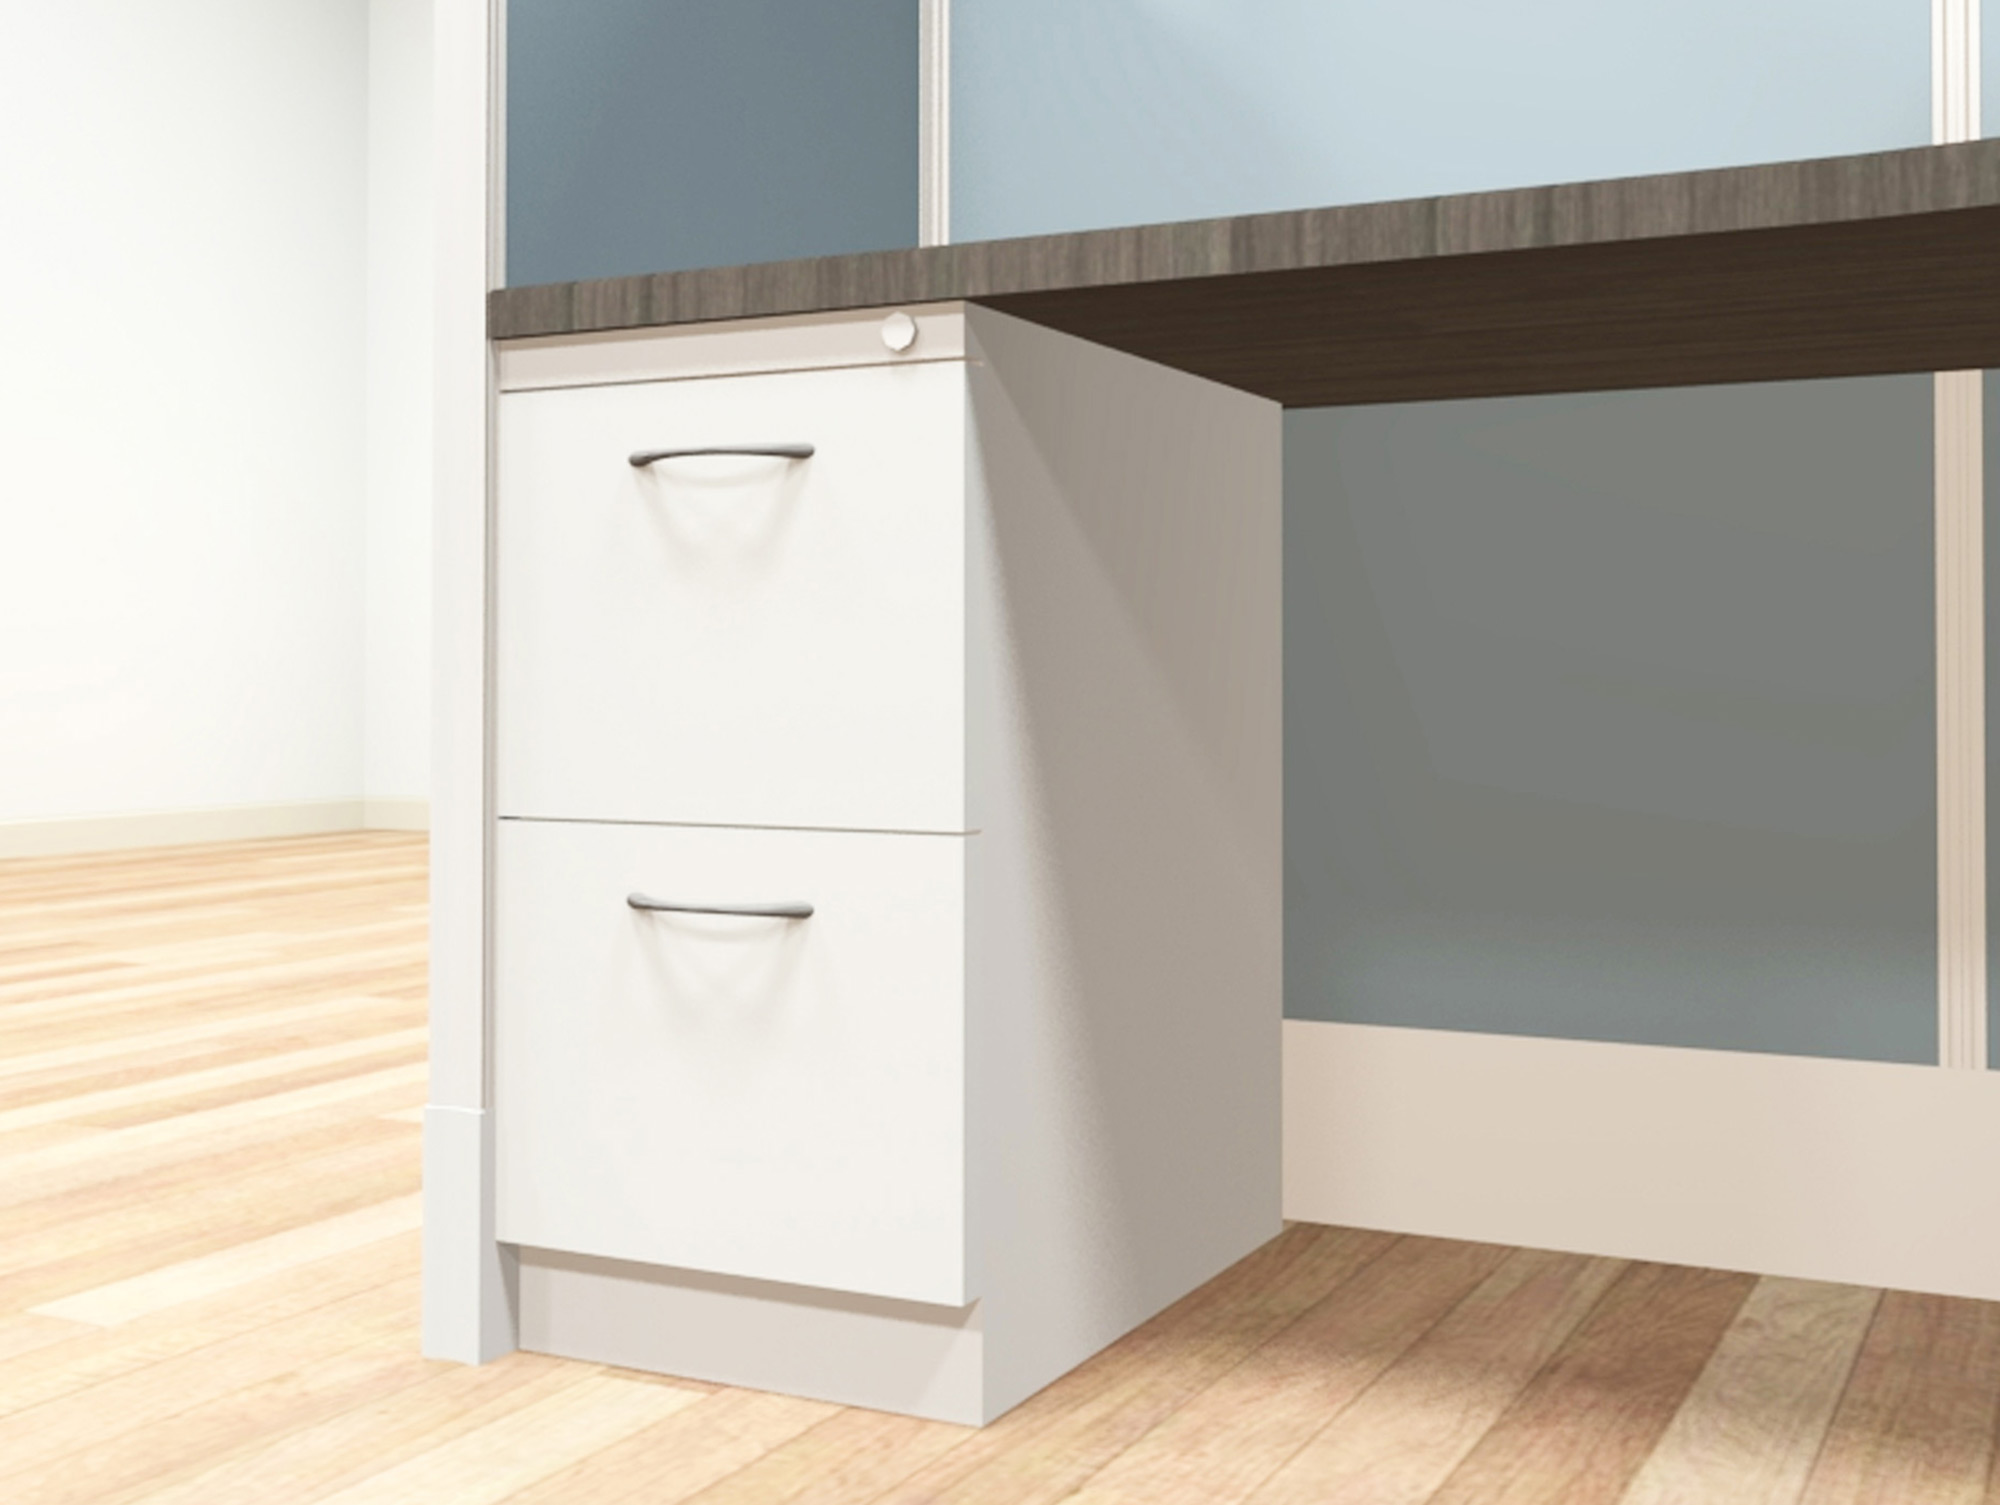 6x6 modular workstations from AIS - a ï¿½file-fileï¿½ pedestal is an under-surface storage cabinet with two deep drawers designed for hanging files. Lock and key secures all drawers from unwanted visitors.